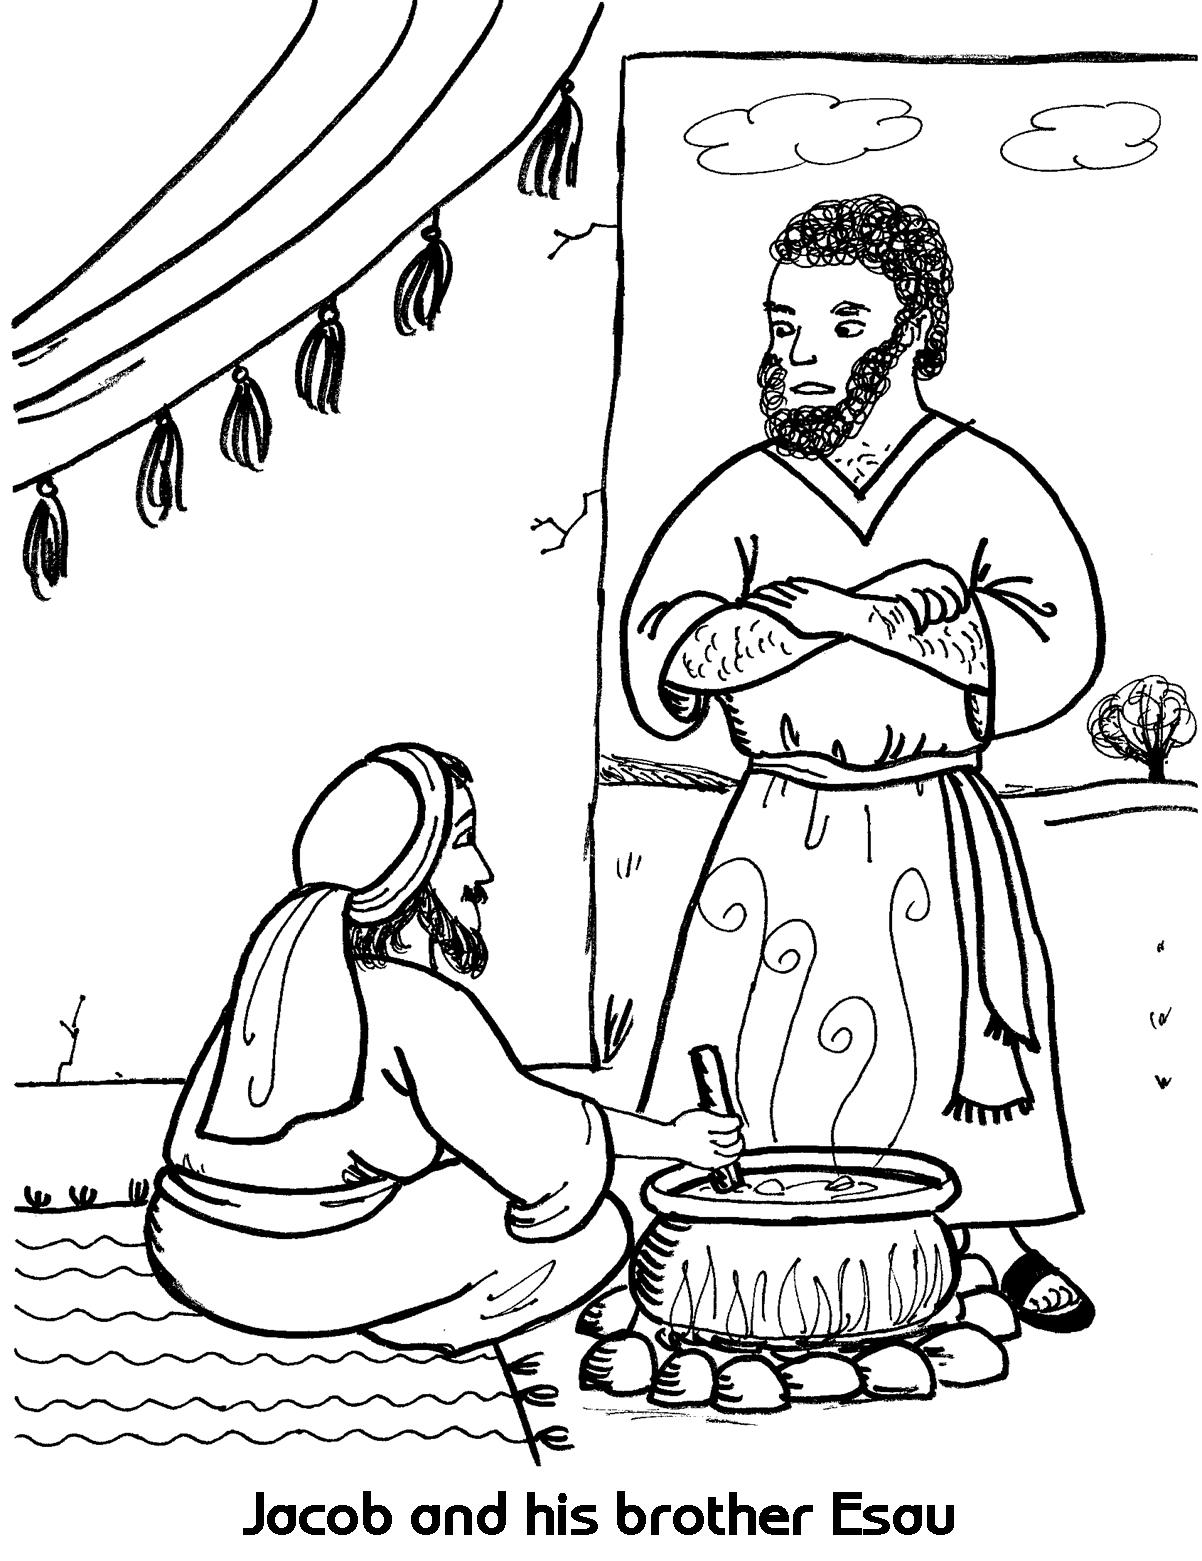 Jacob And Esau - Coloring Pages for Kids and for Adults